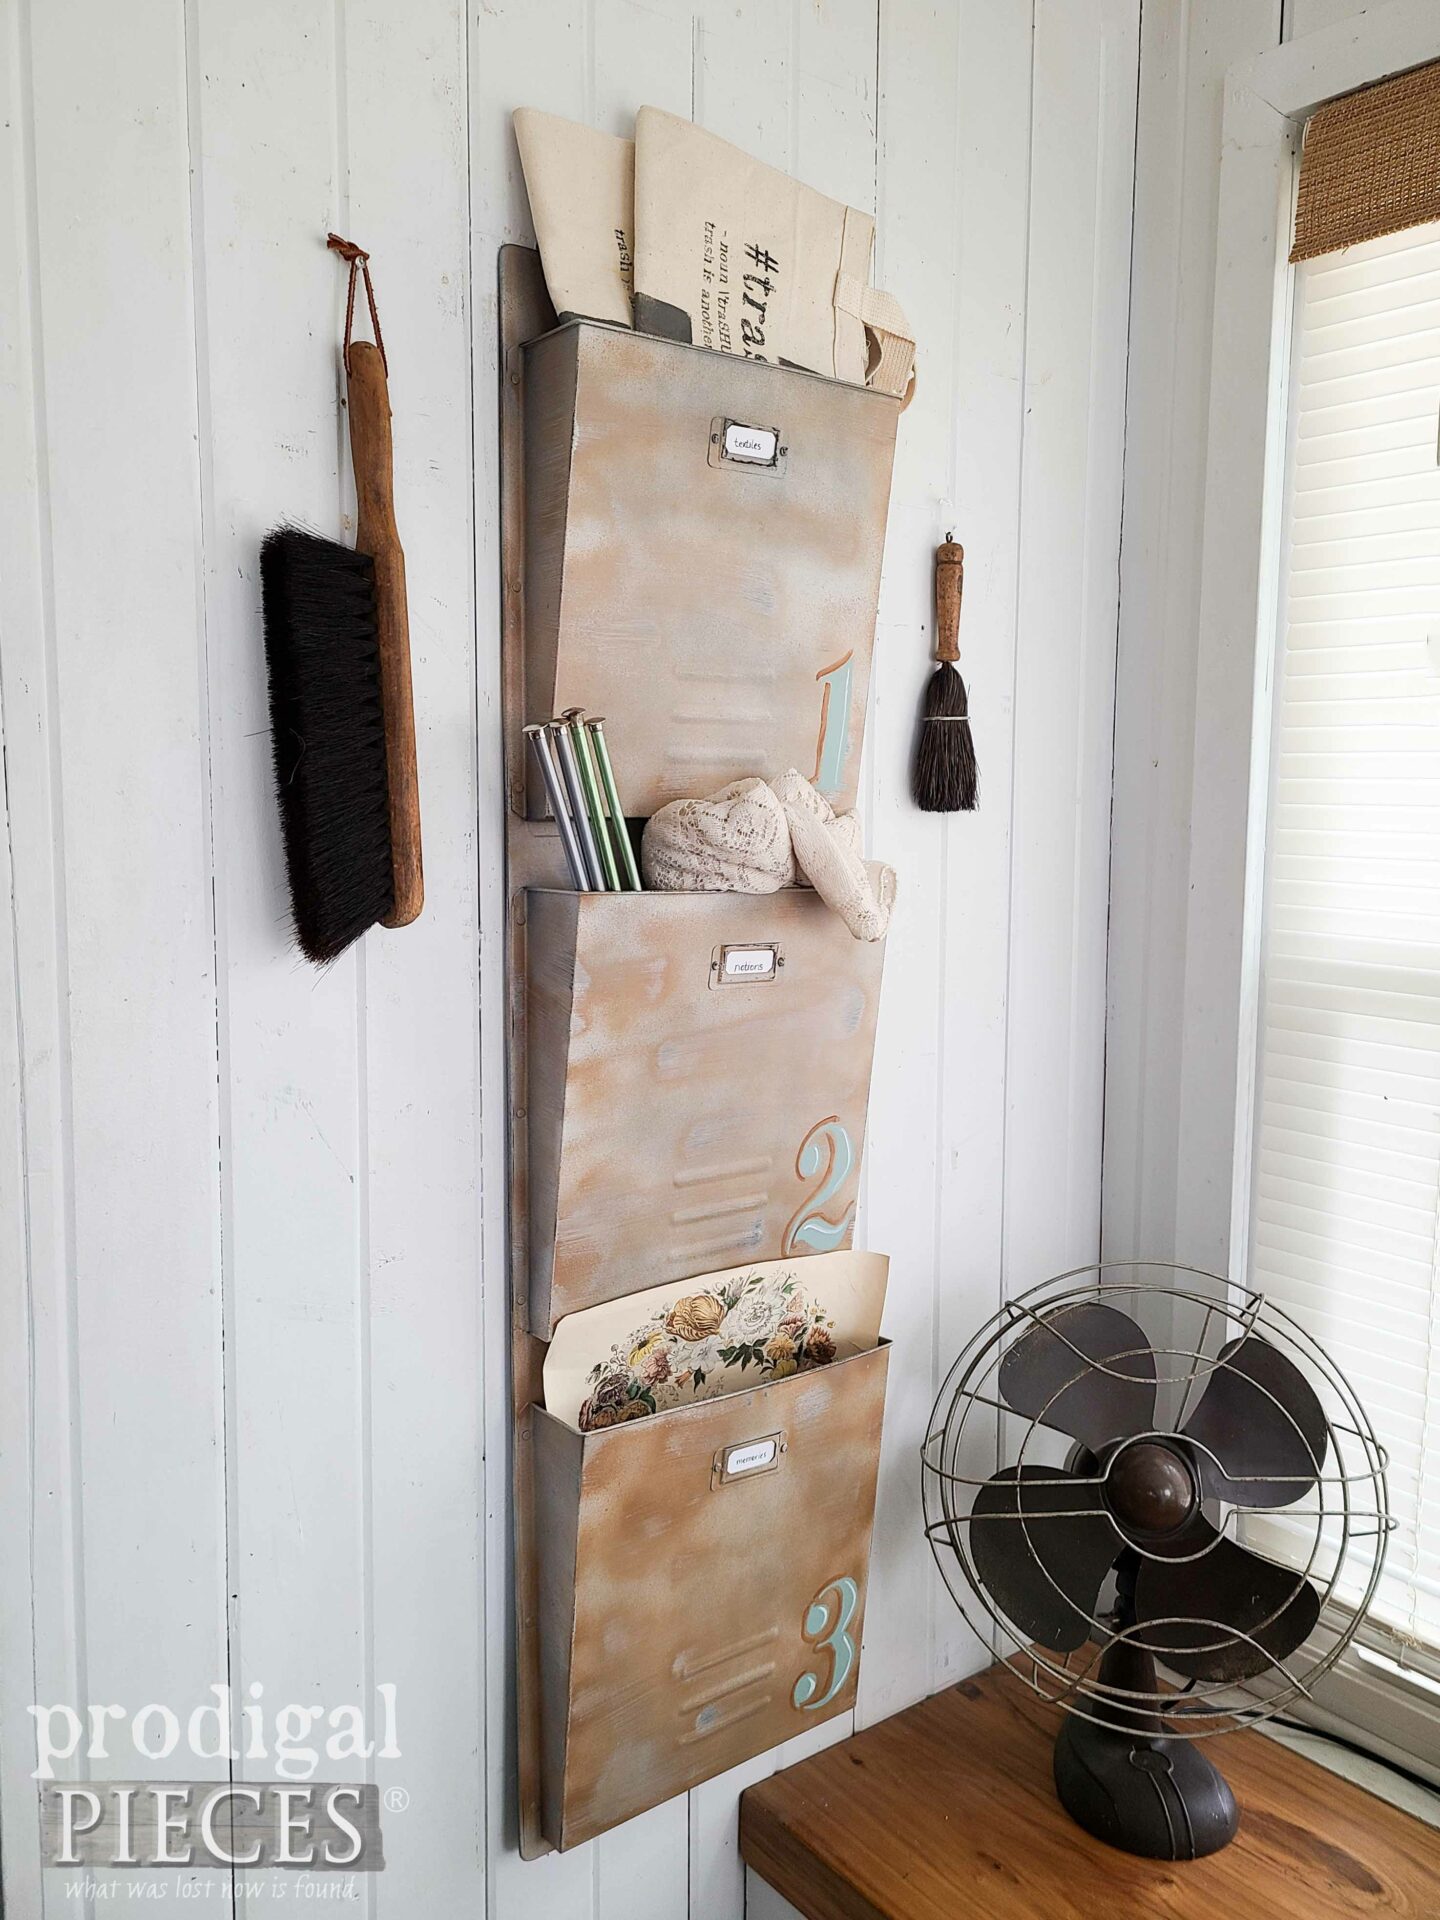 Vintage Farmhouse Vertical Wall File Organizer by Larissa of Prodigal Pieces | prodigalpieces.com #prodigalpieces #diy #vintage #industrial